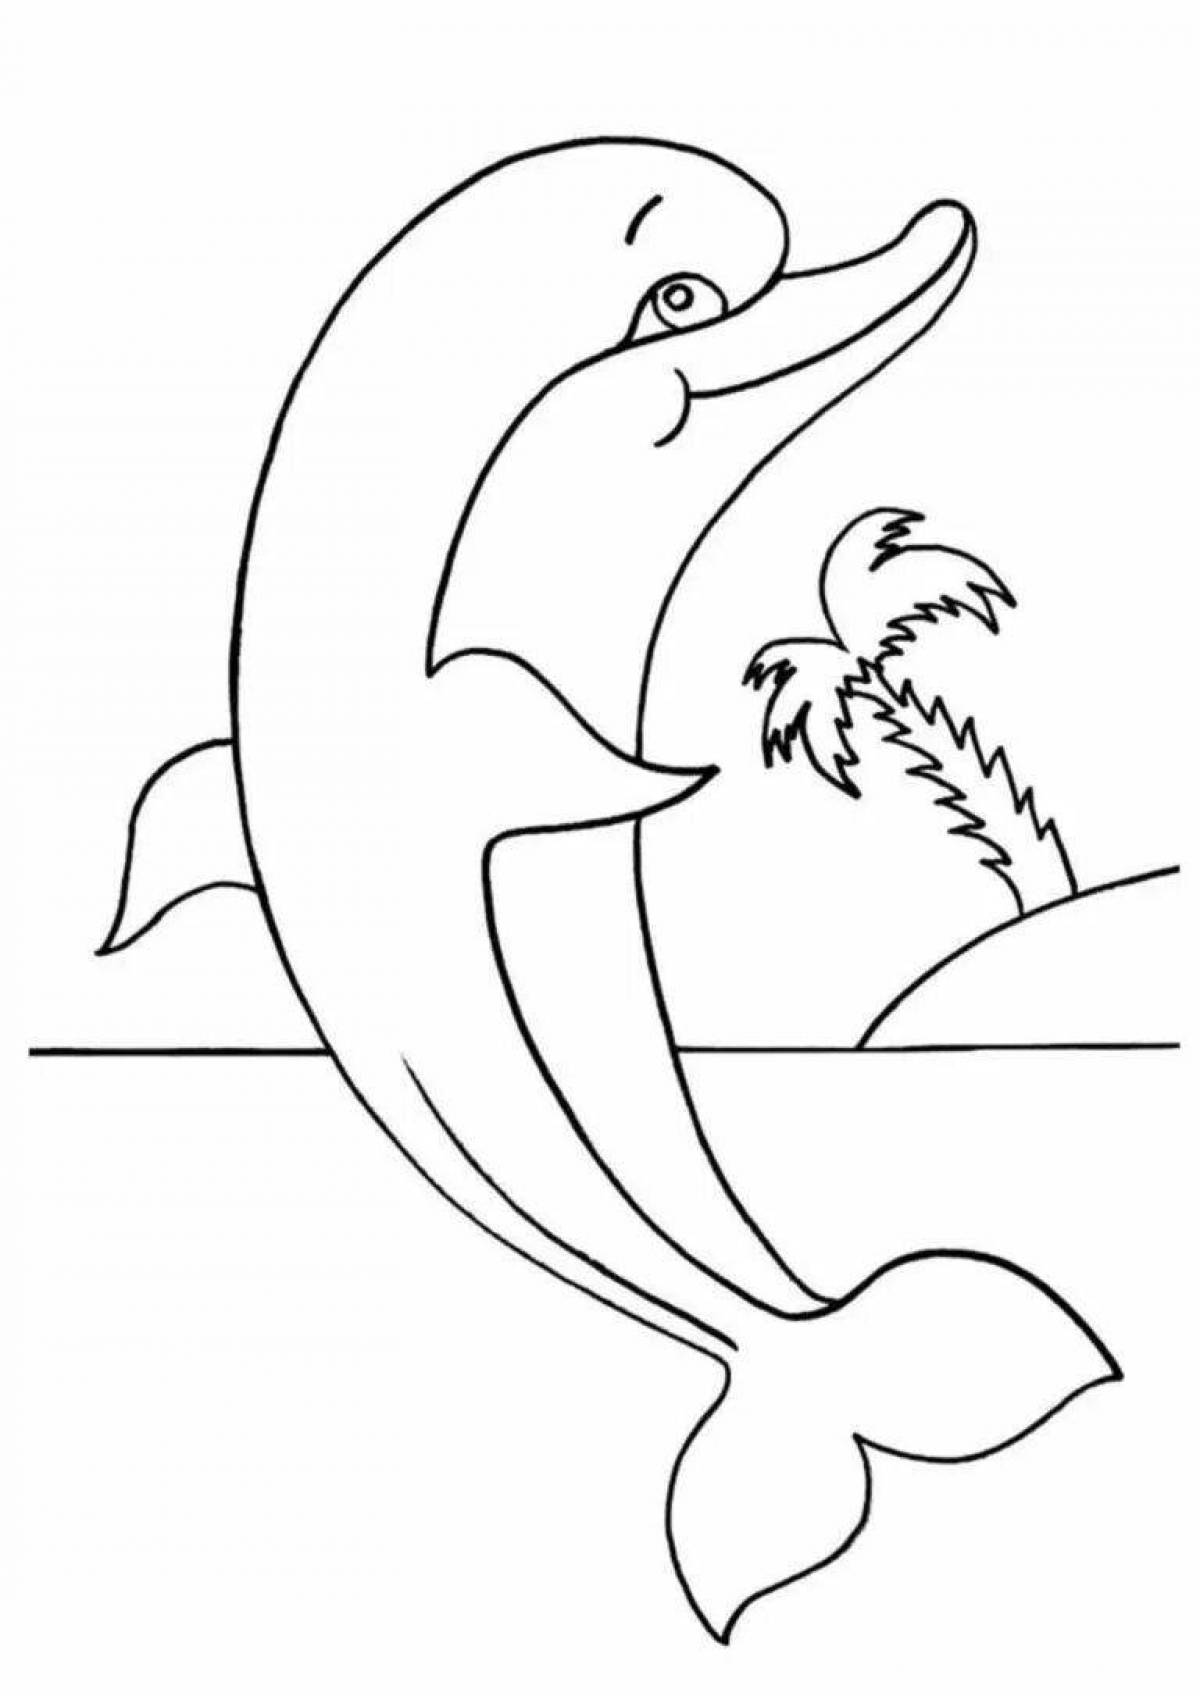 Adorable dolphin coloring book for kids